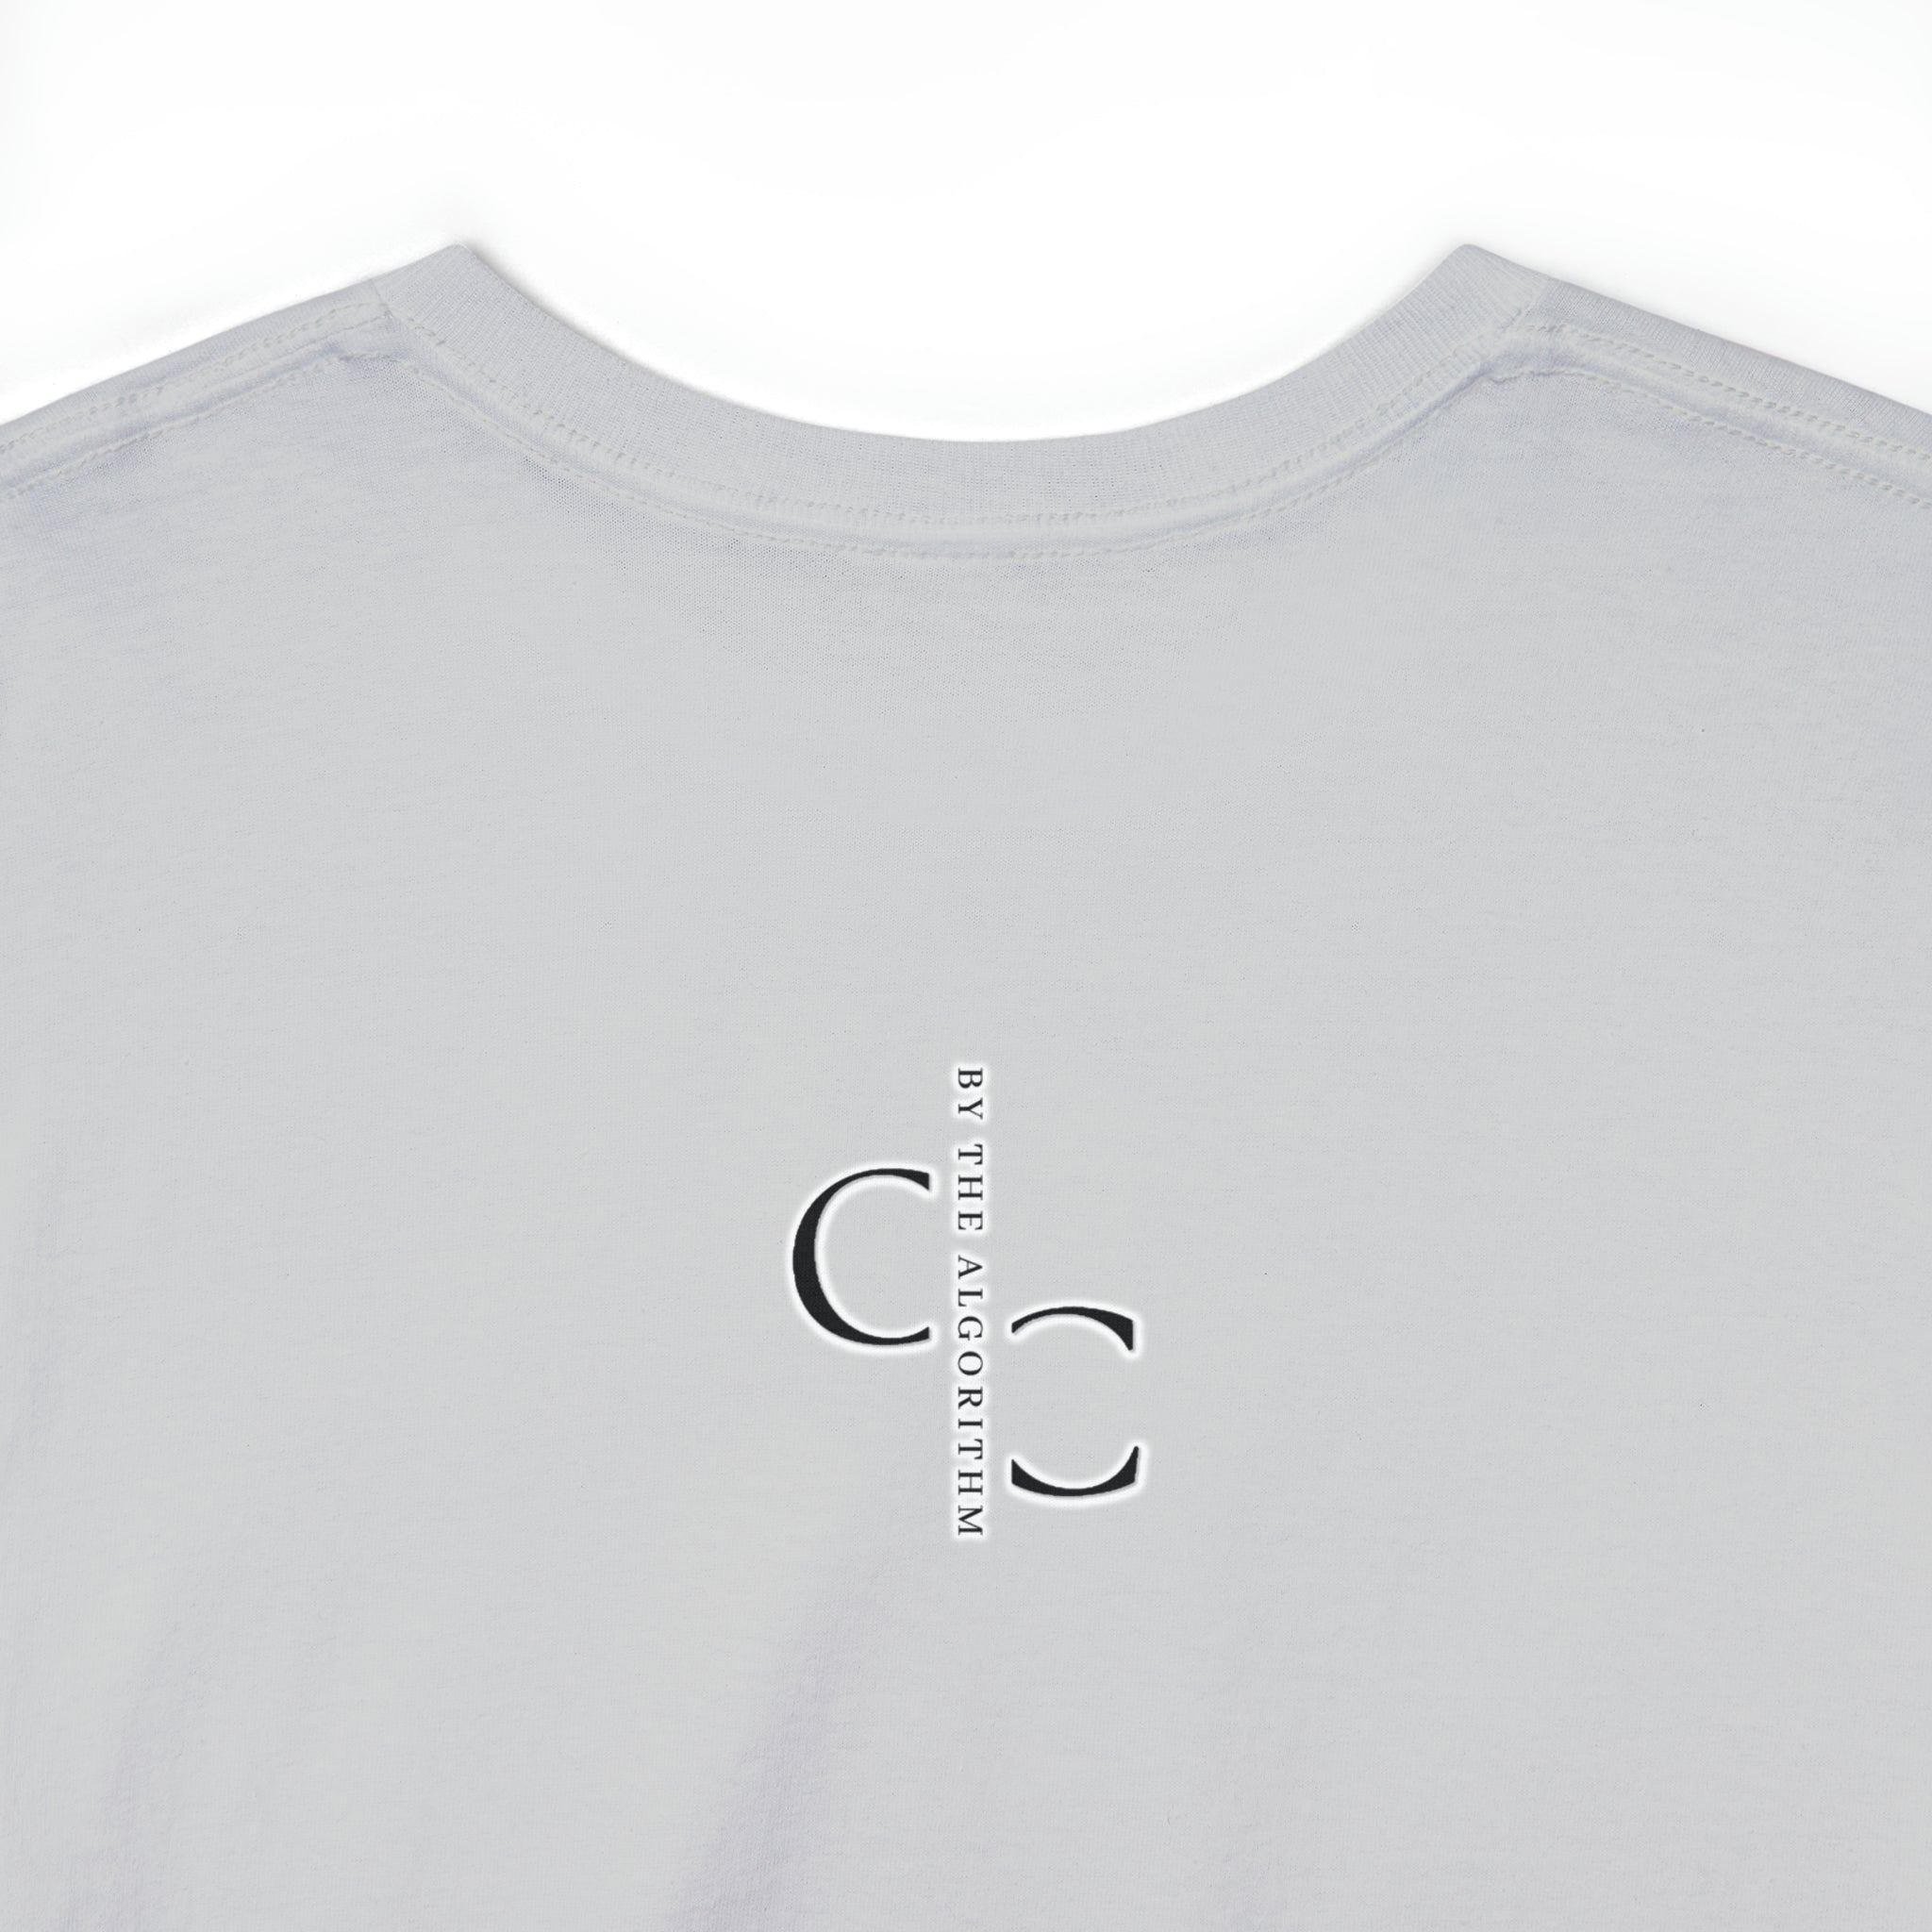 Chai and Code T-Shirt Design by C&C